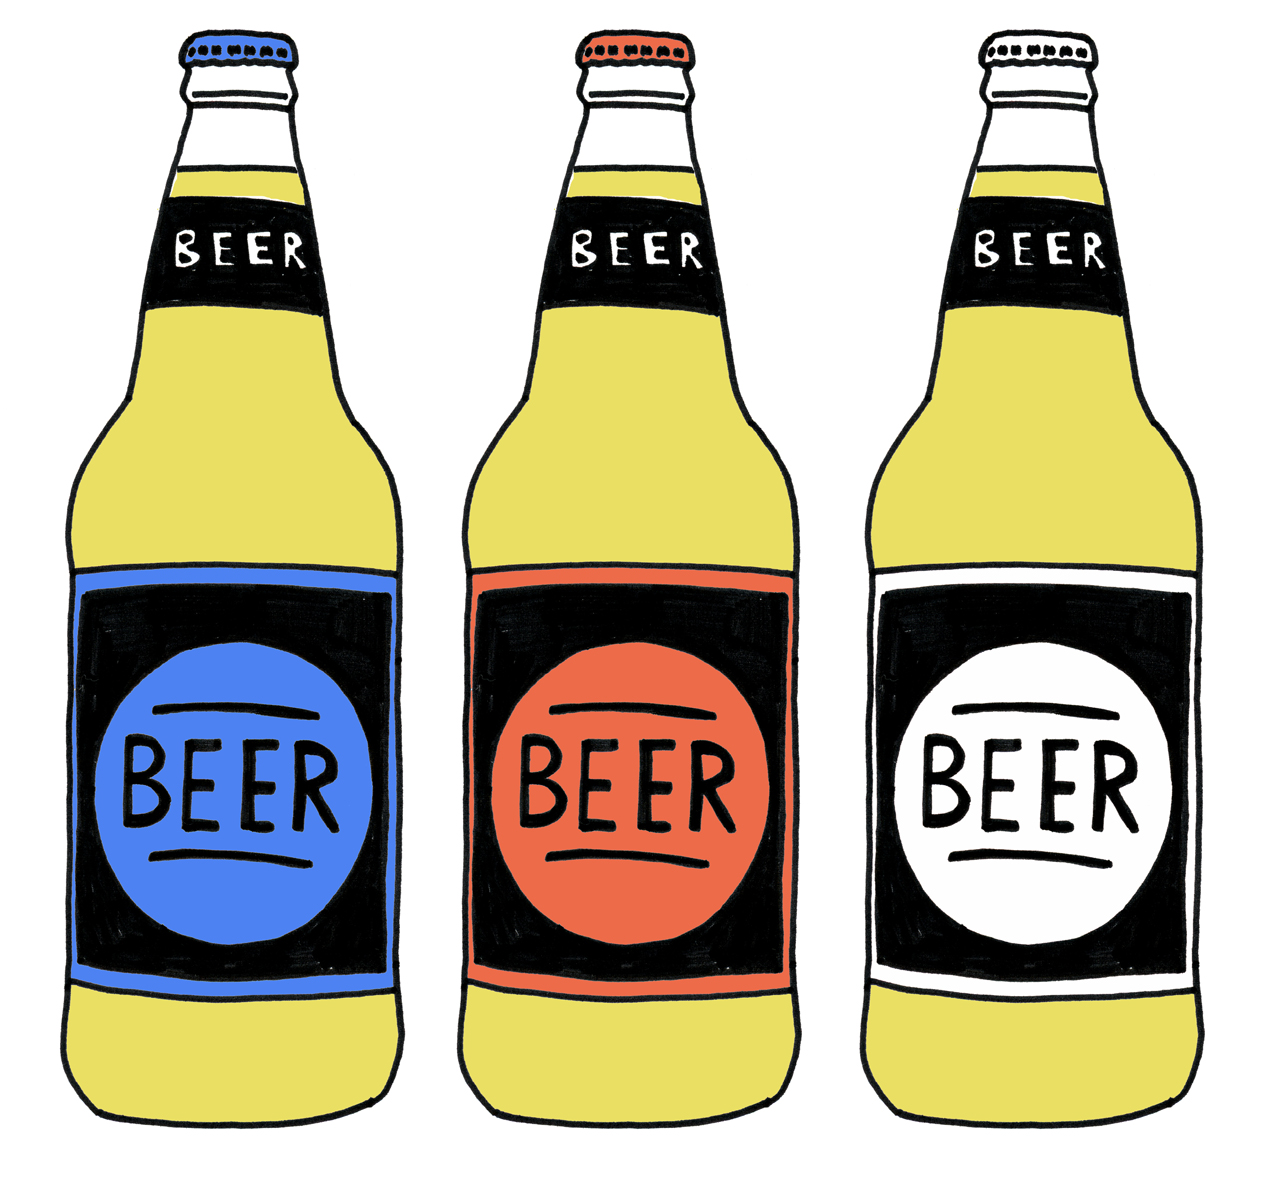 Beer and Cider bottle illustrations | || Analogue Forever - ClipArt